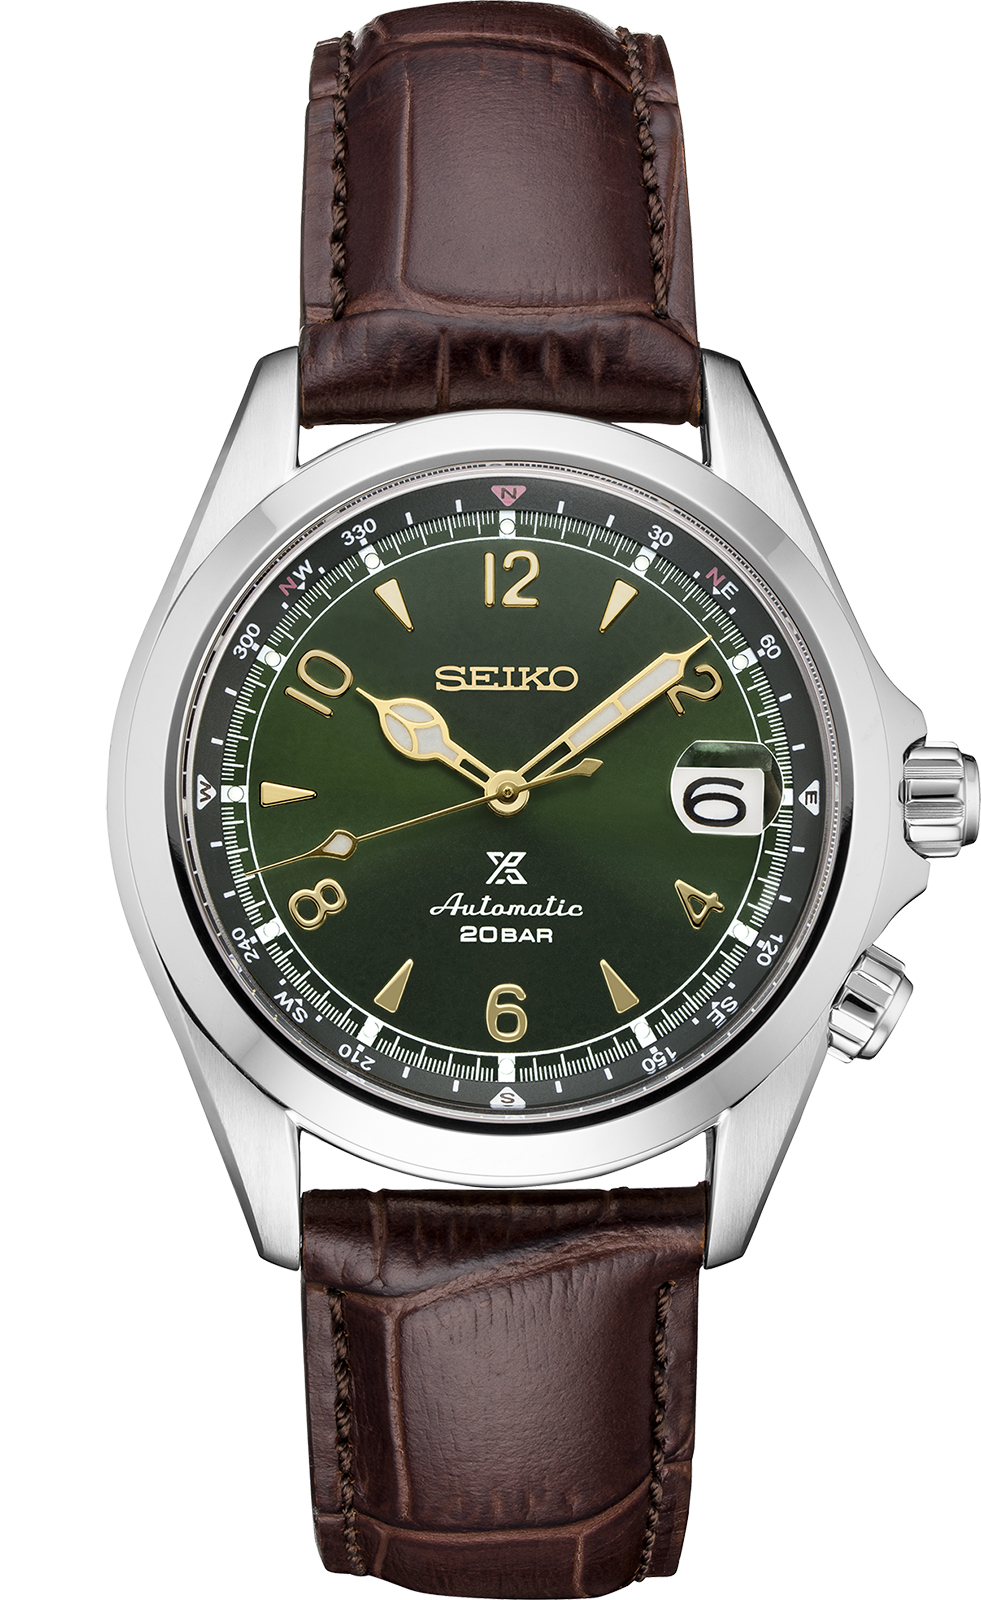 Seiko Adds Four New Alpinist-Inspired Watches To Prospex Line For 2020 |  aBlogtoWatch